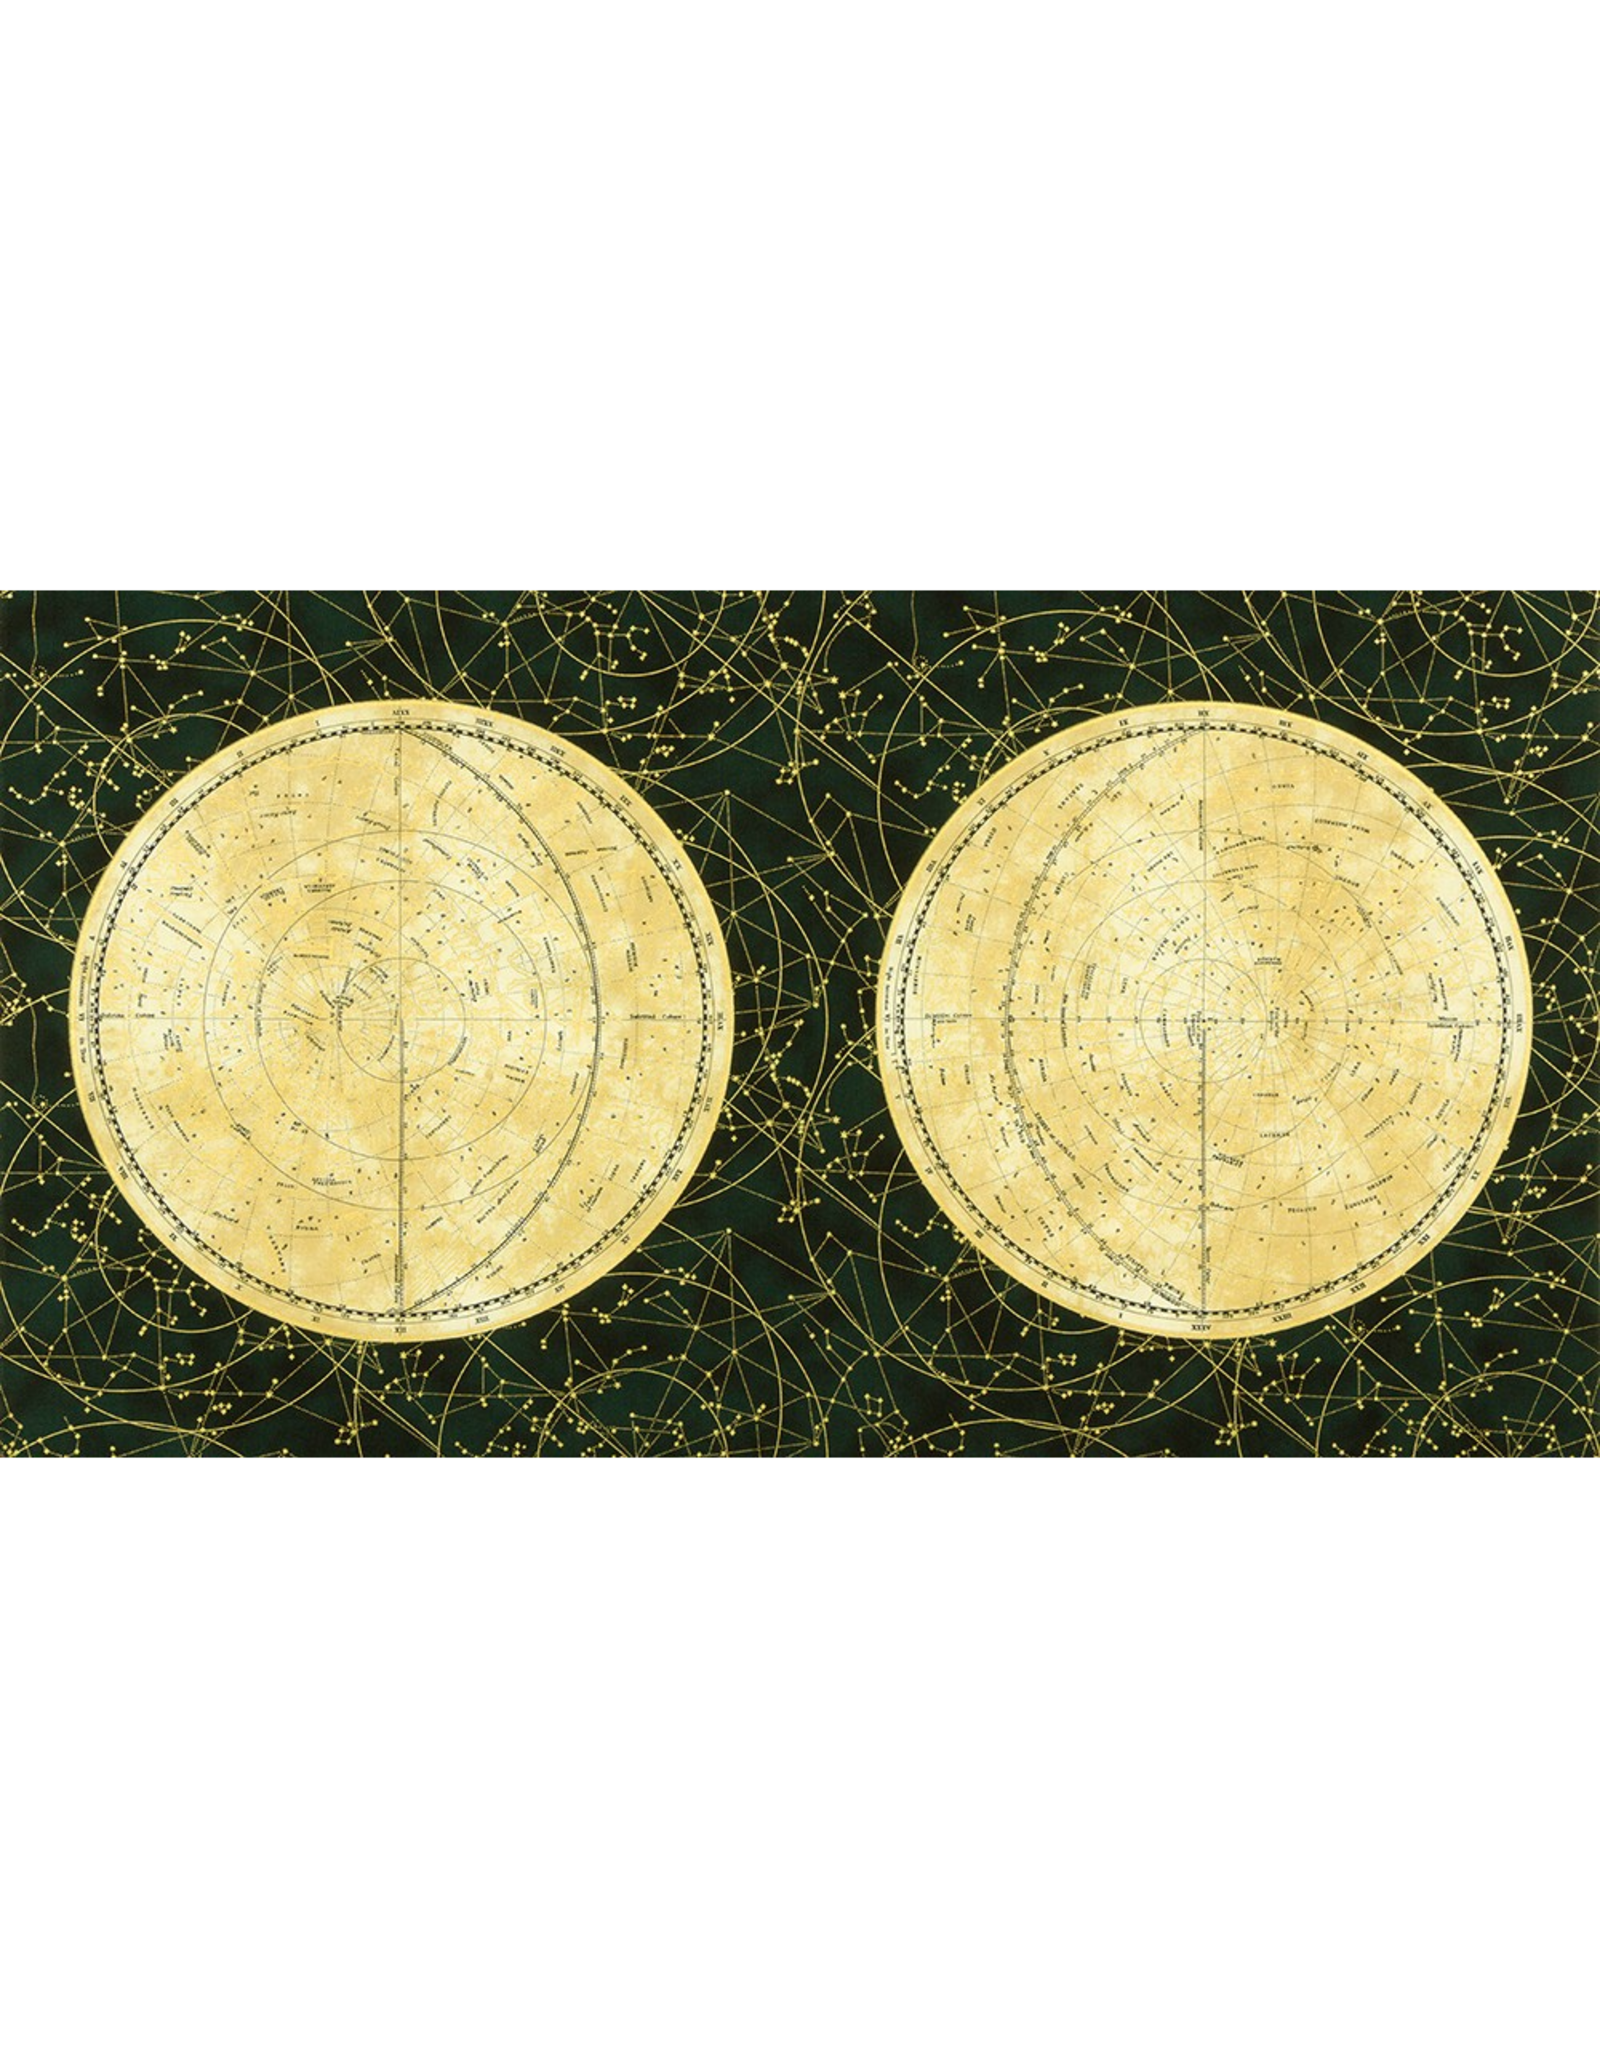 Robert Kaufman Star Maps, Maps in Astral with Metallic, 24"x 44" Fabric Panels